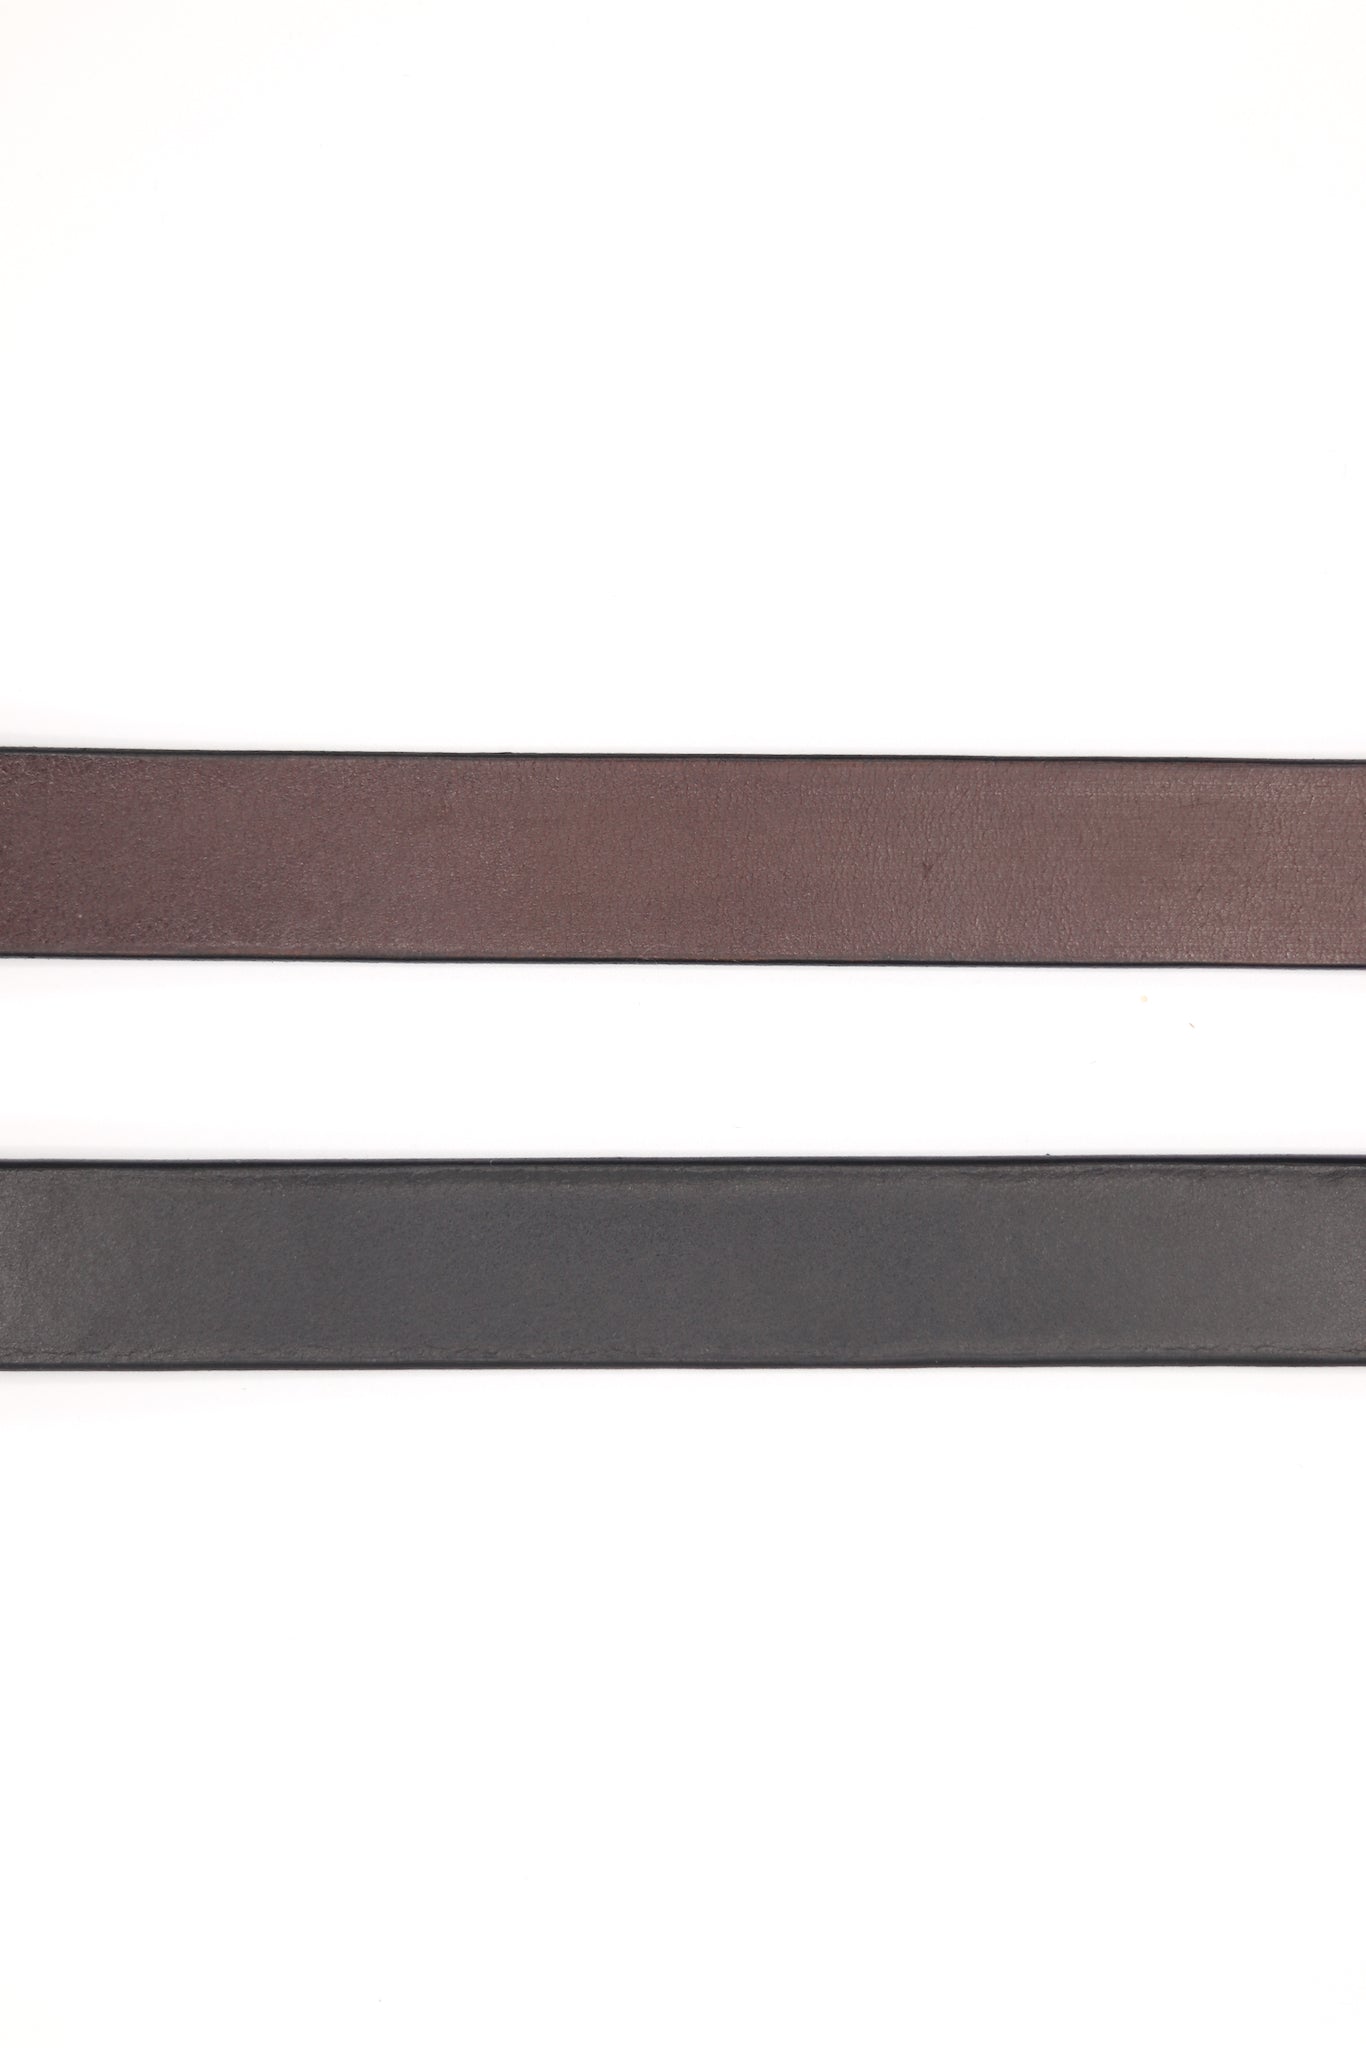 Black and Brown Swatch of Handmade 25mm English Bridle Leather Belt